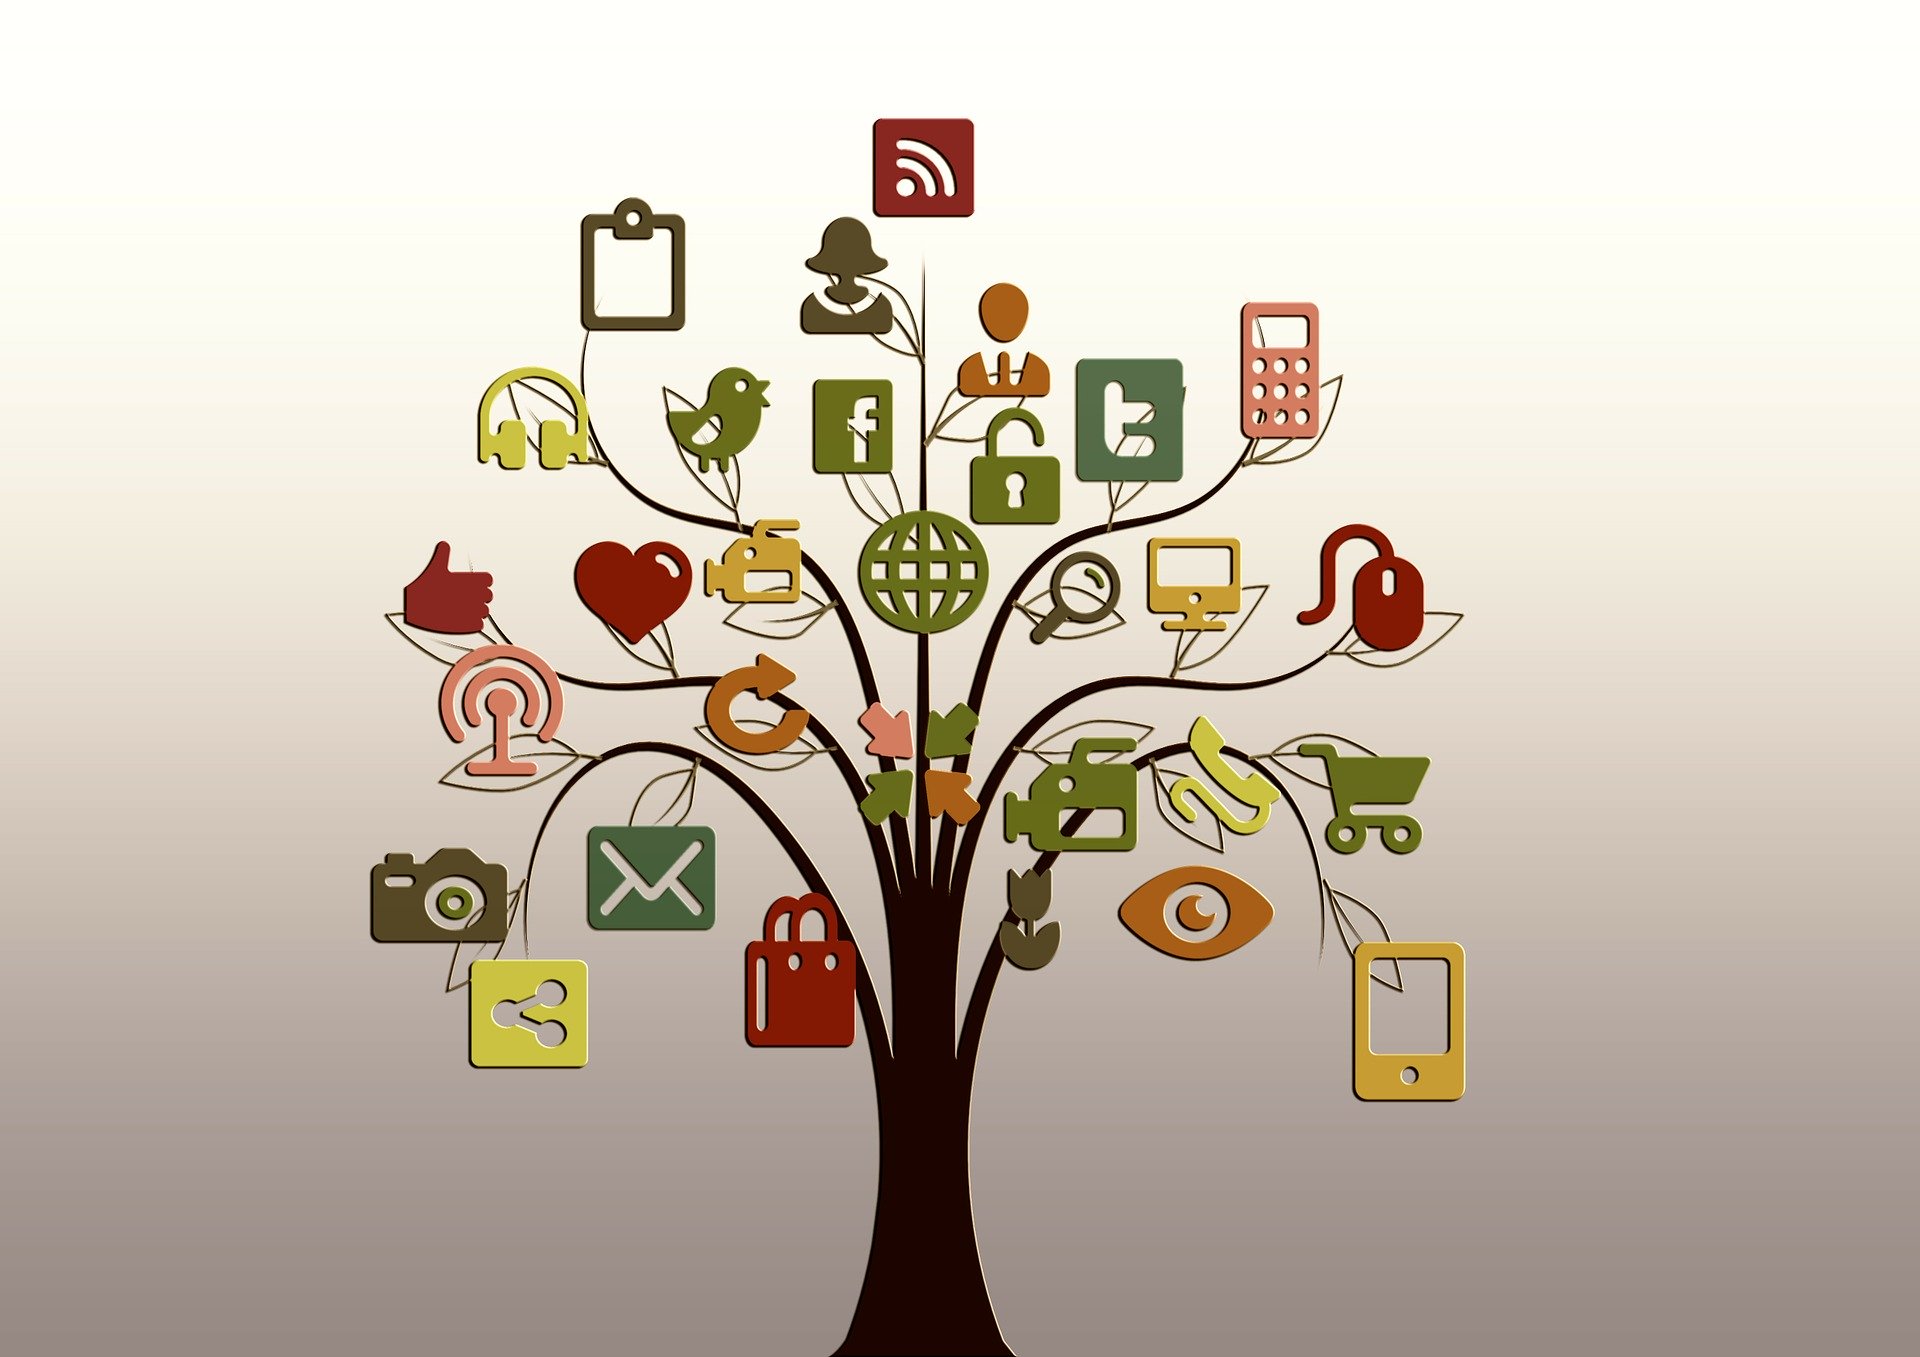 Tree with digital icons social networks